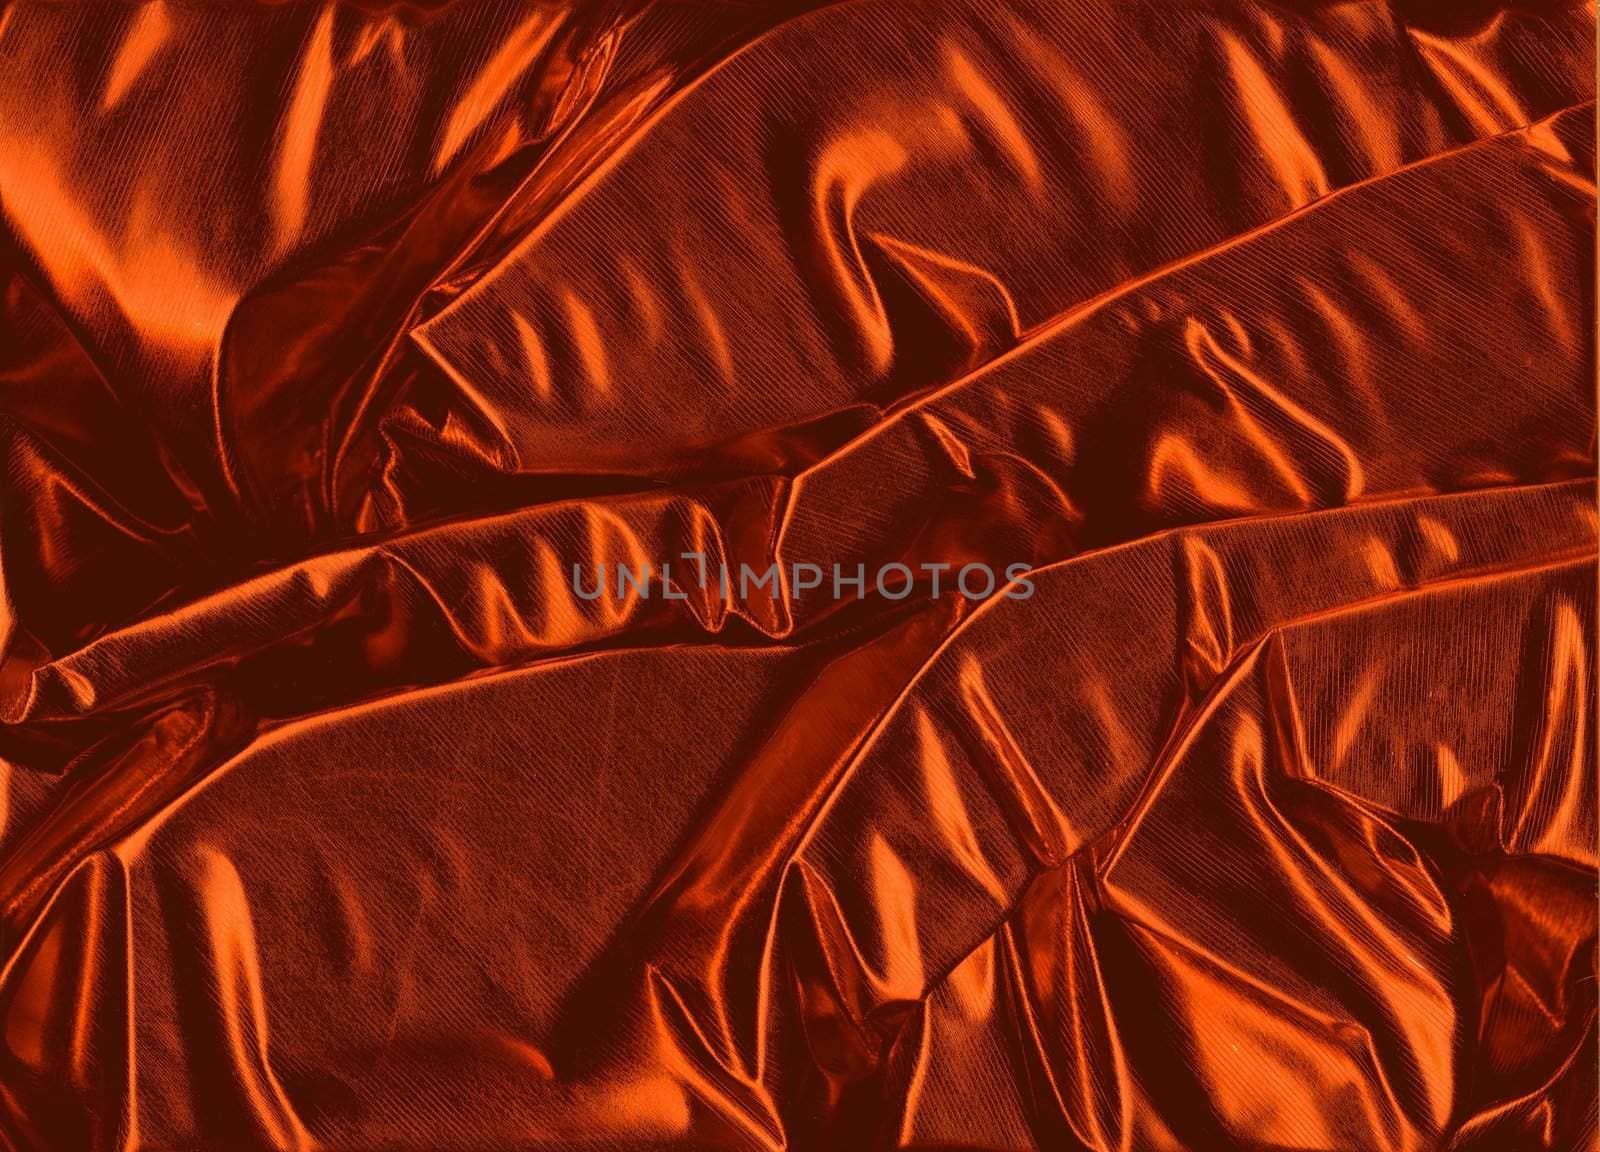 An exclusive background of shiny copper decoration fabric with a metallic surface.